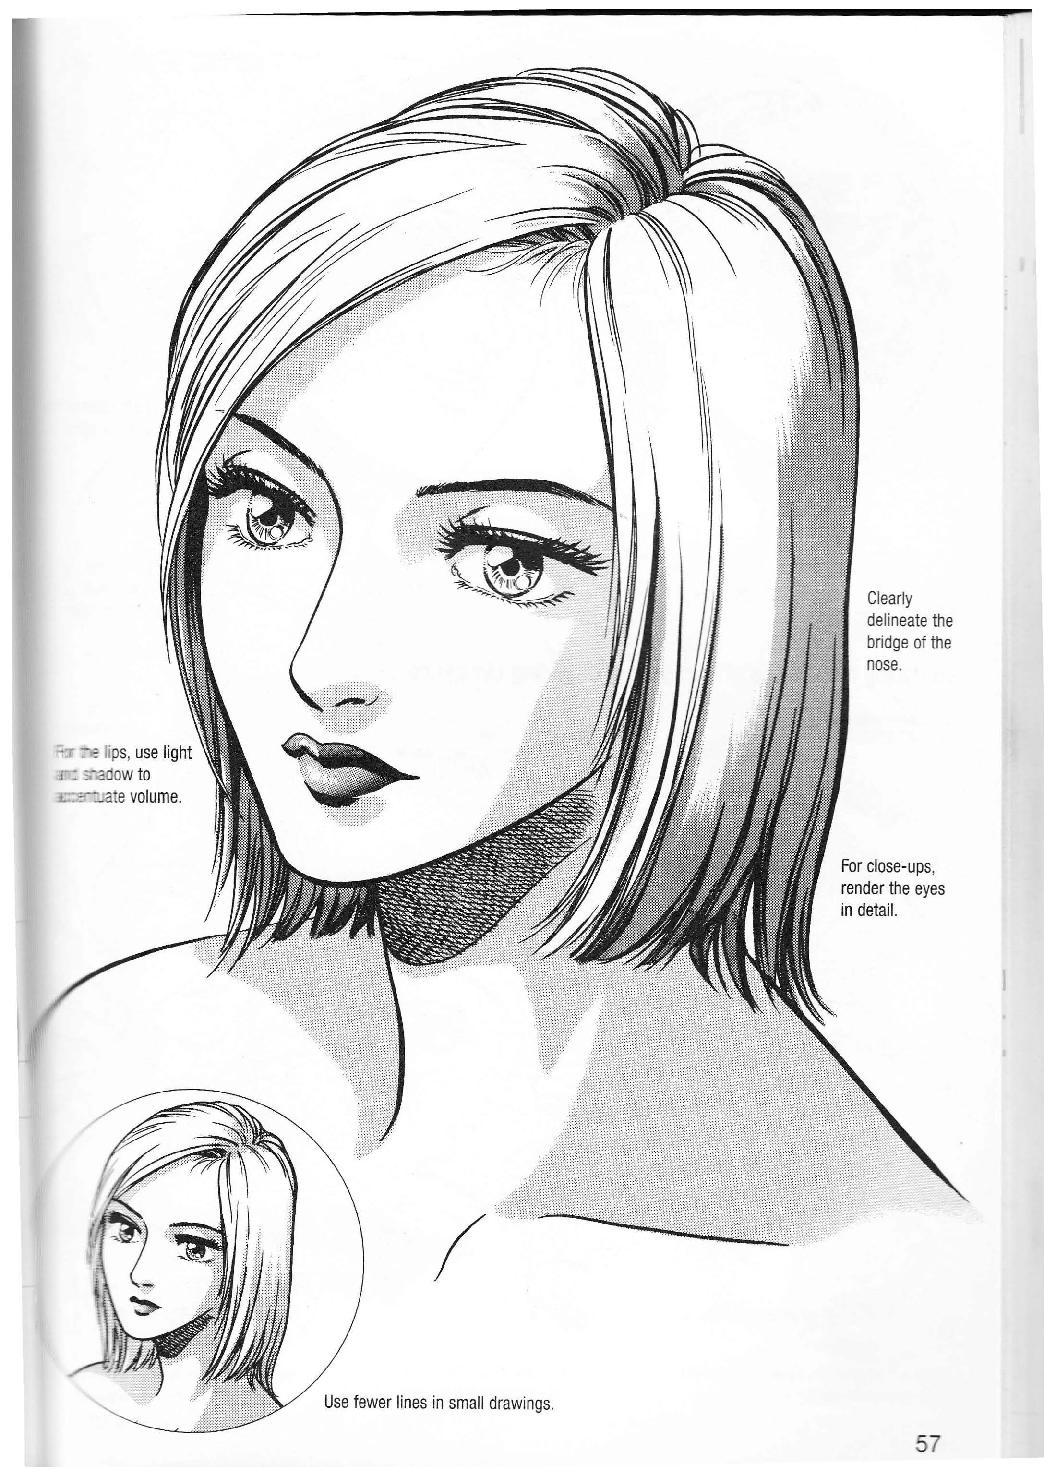 More How to Draw Manga Vol. 2 - Penning Characters 58